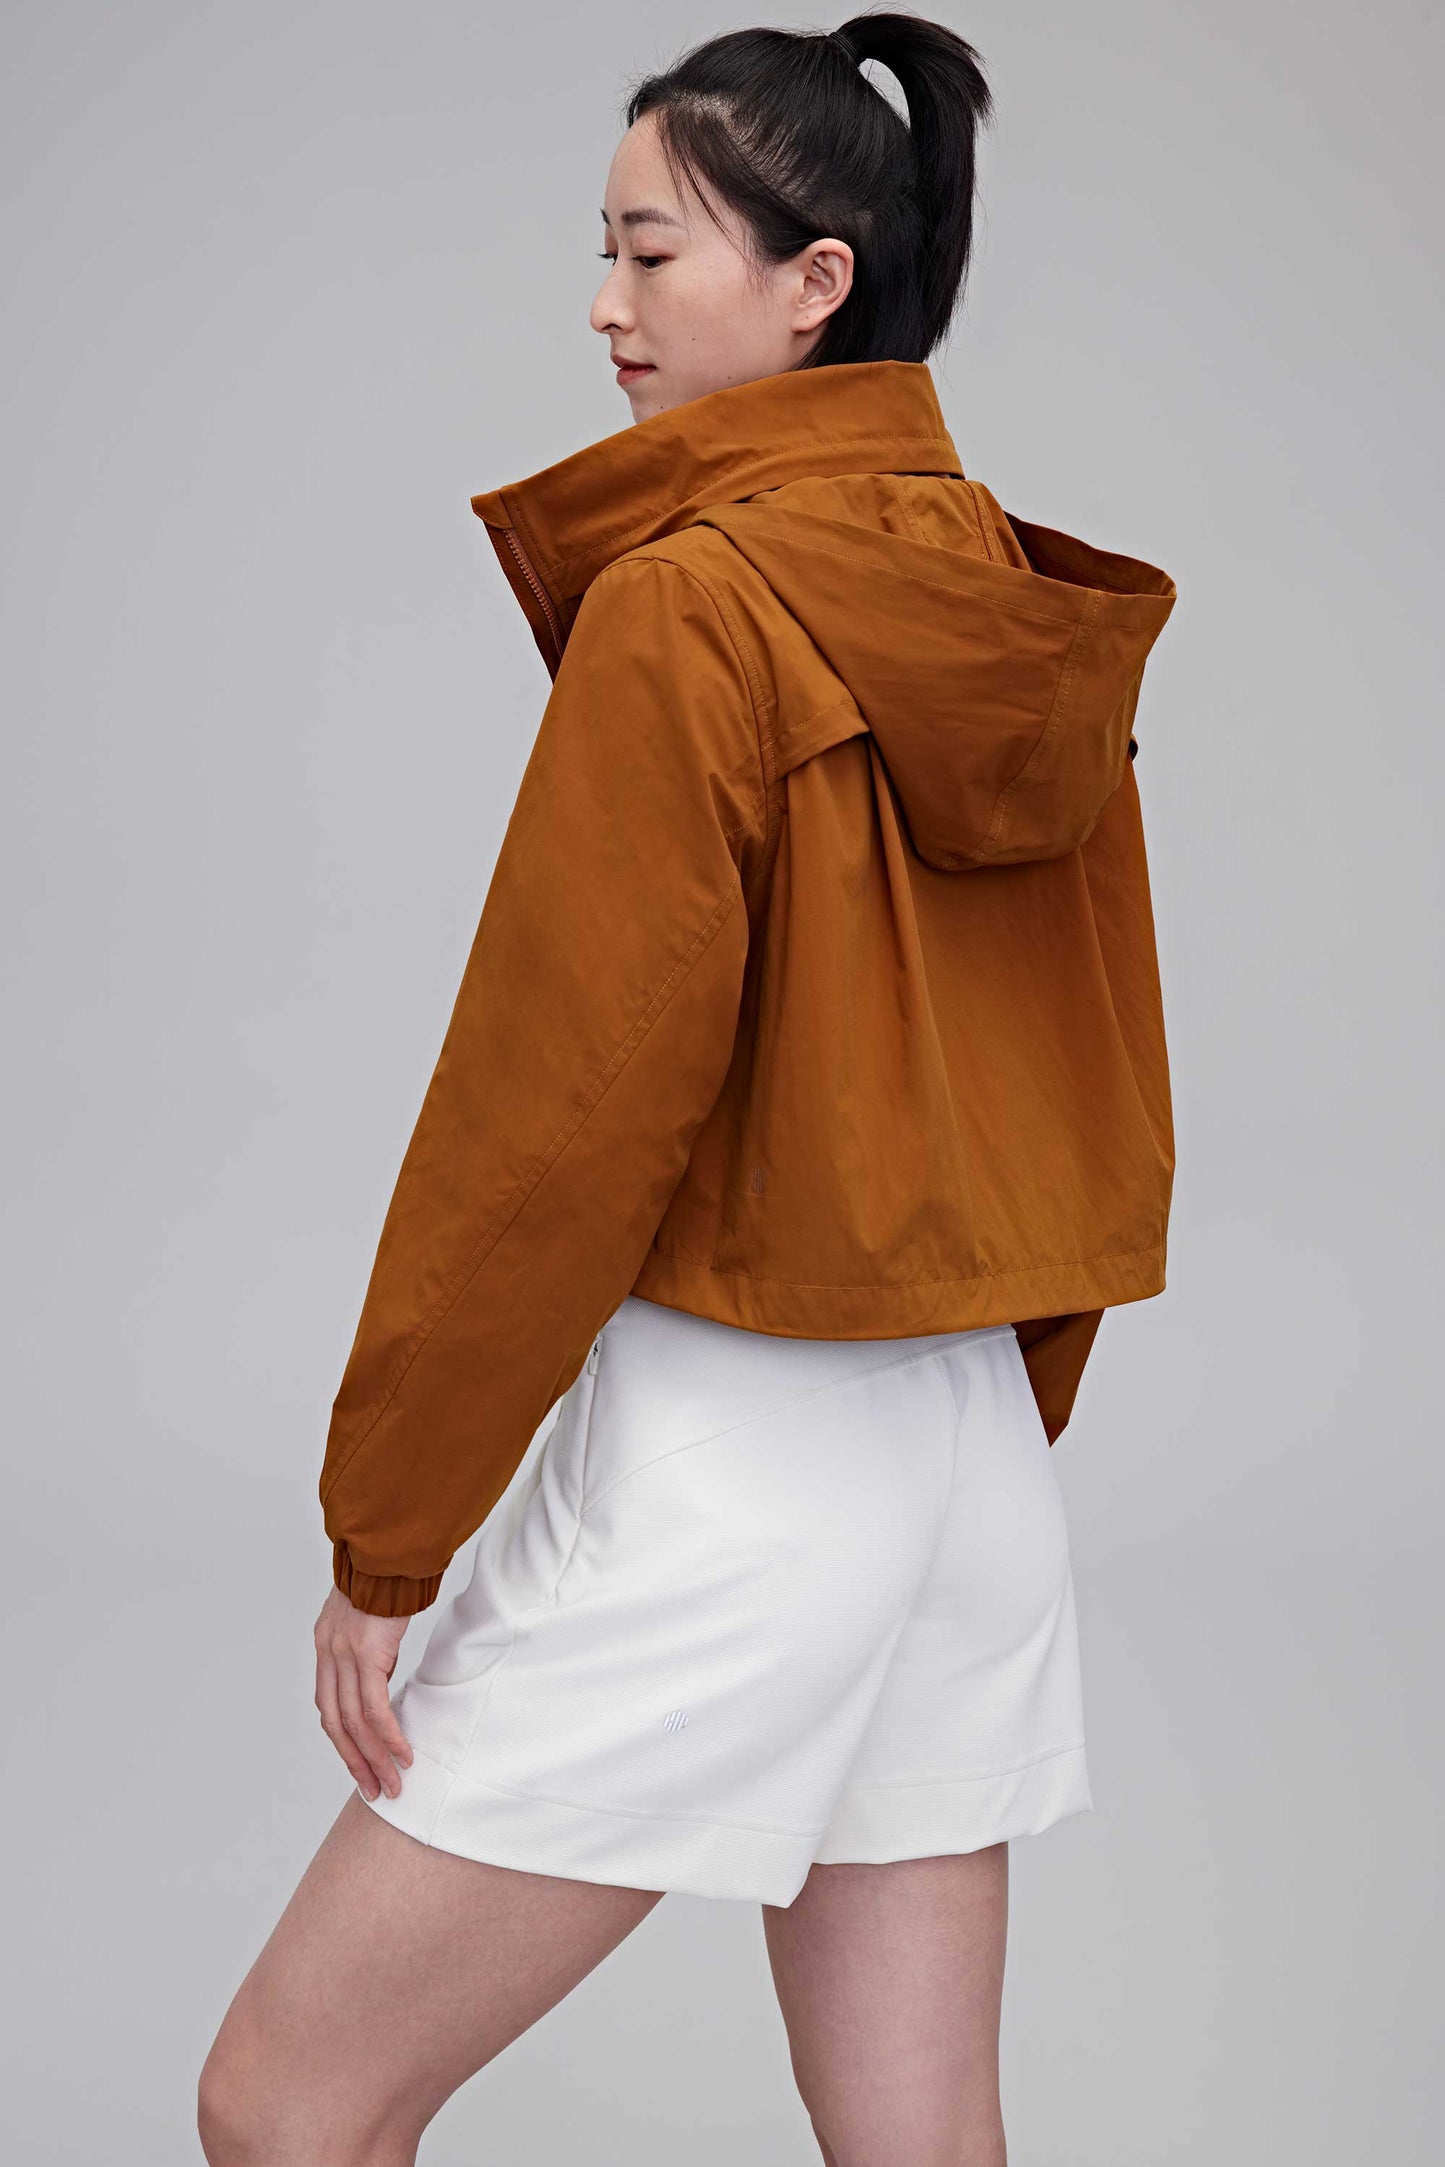 Back of woman in brown jacket